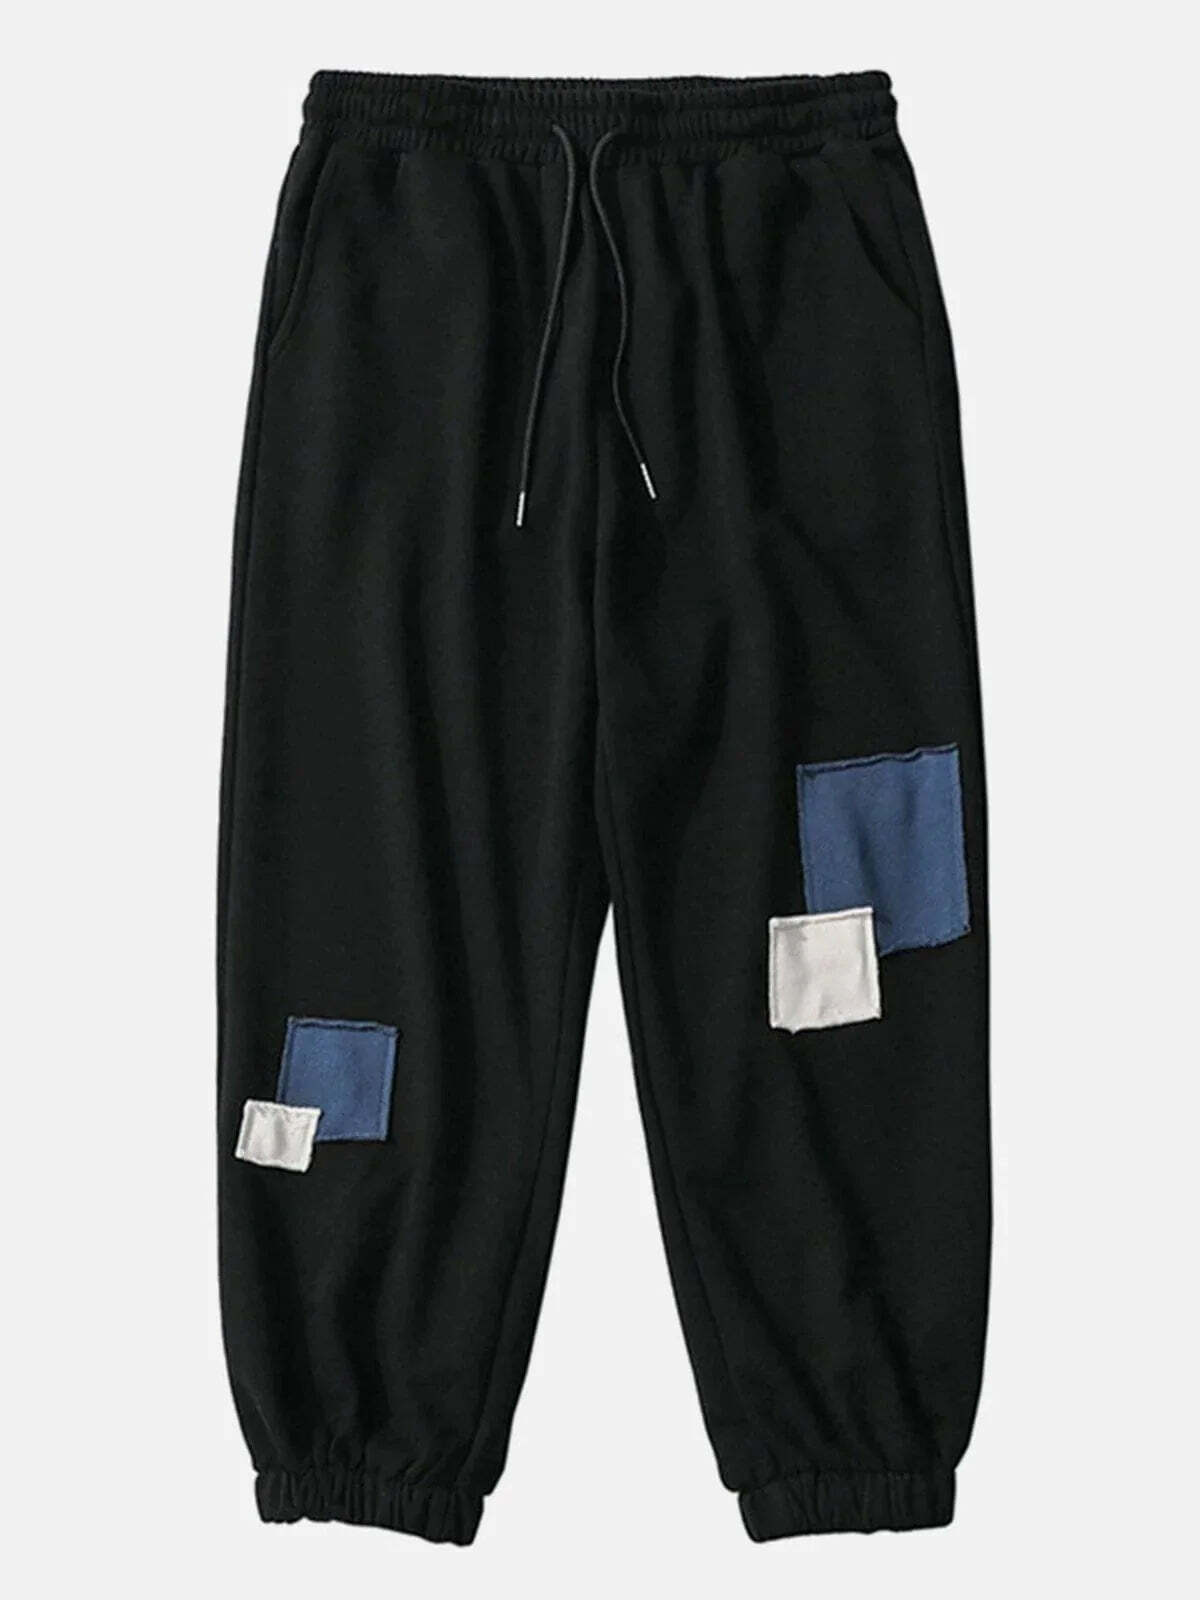 revolutionary patch panel track pants edgy & dynamic streetwear 6996